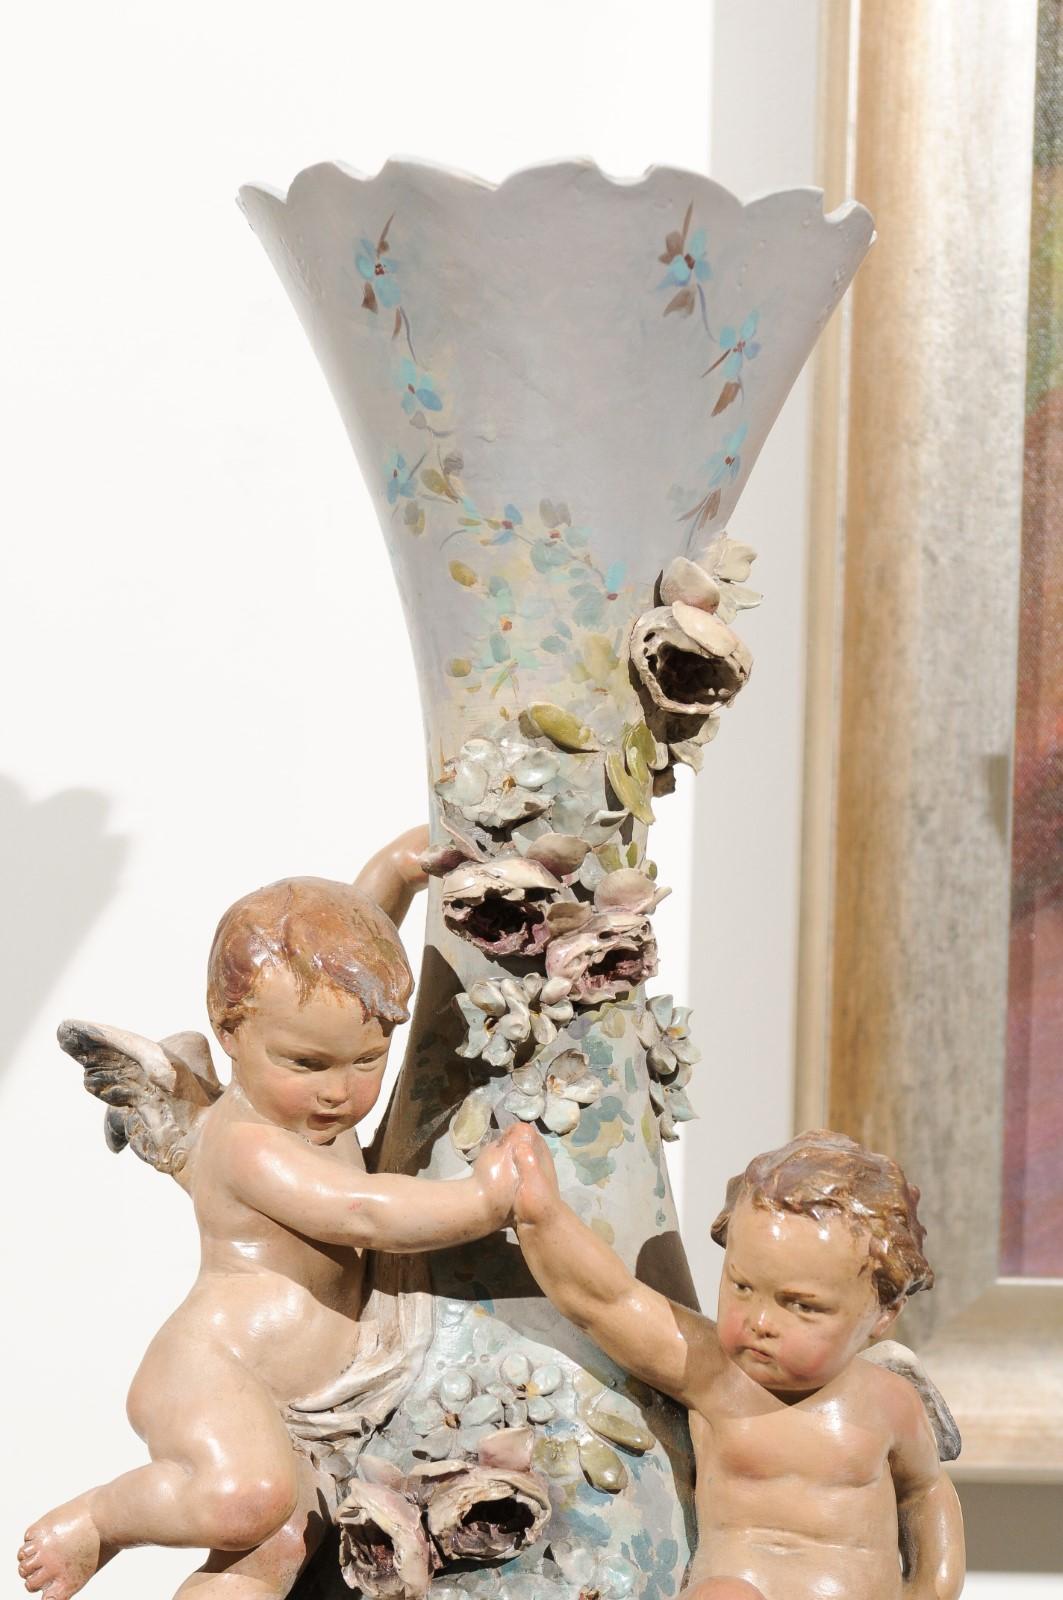 French 1870s Slender Majolica Vase with Floral Décor and High-Relief Cherubs For Sale 4